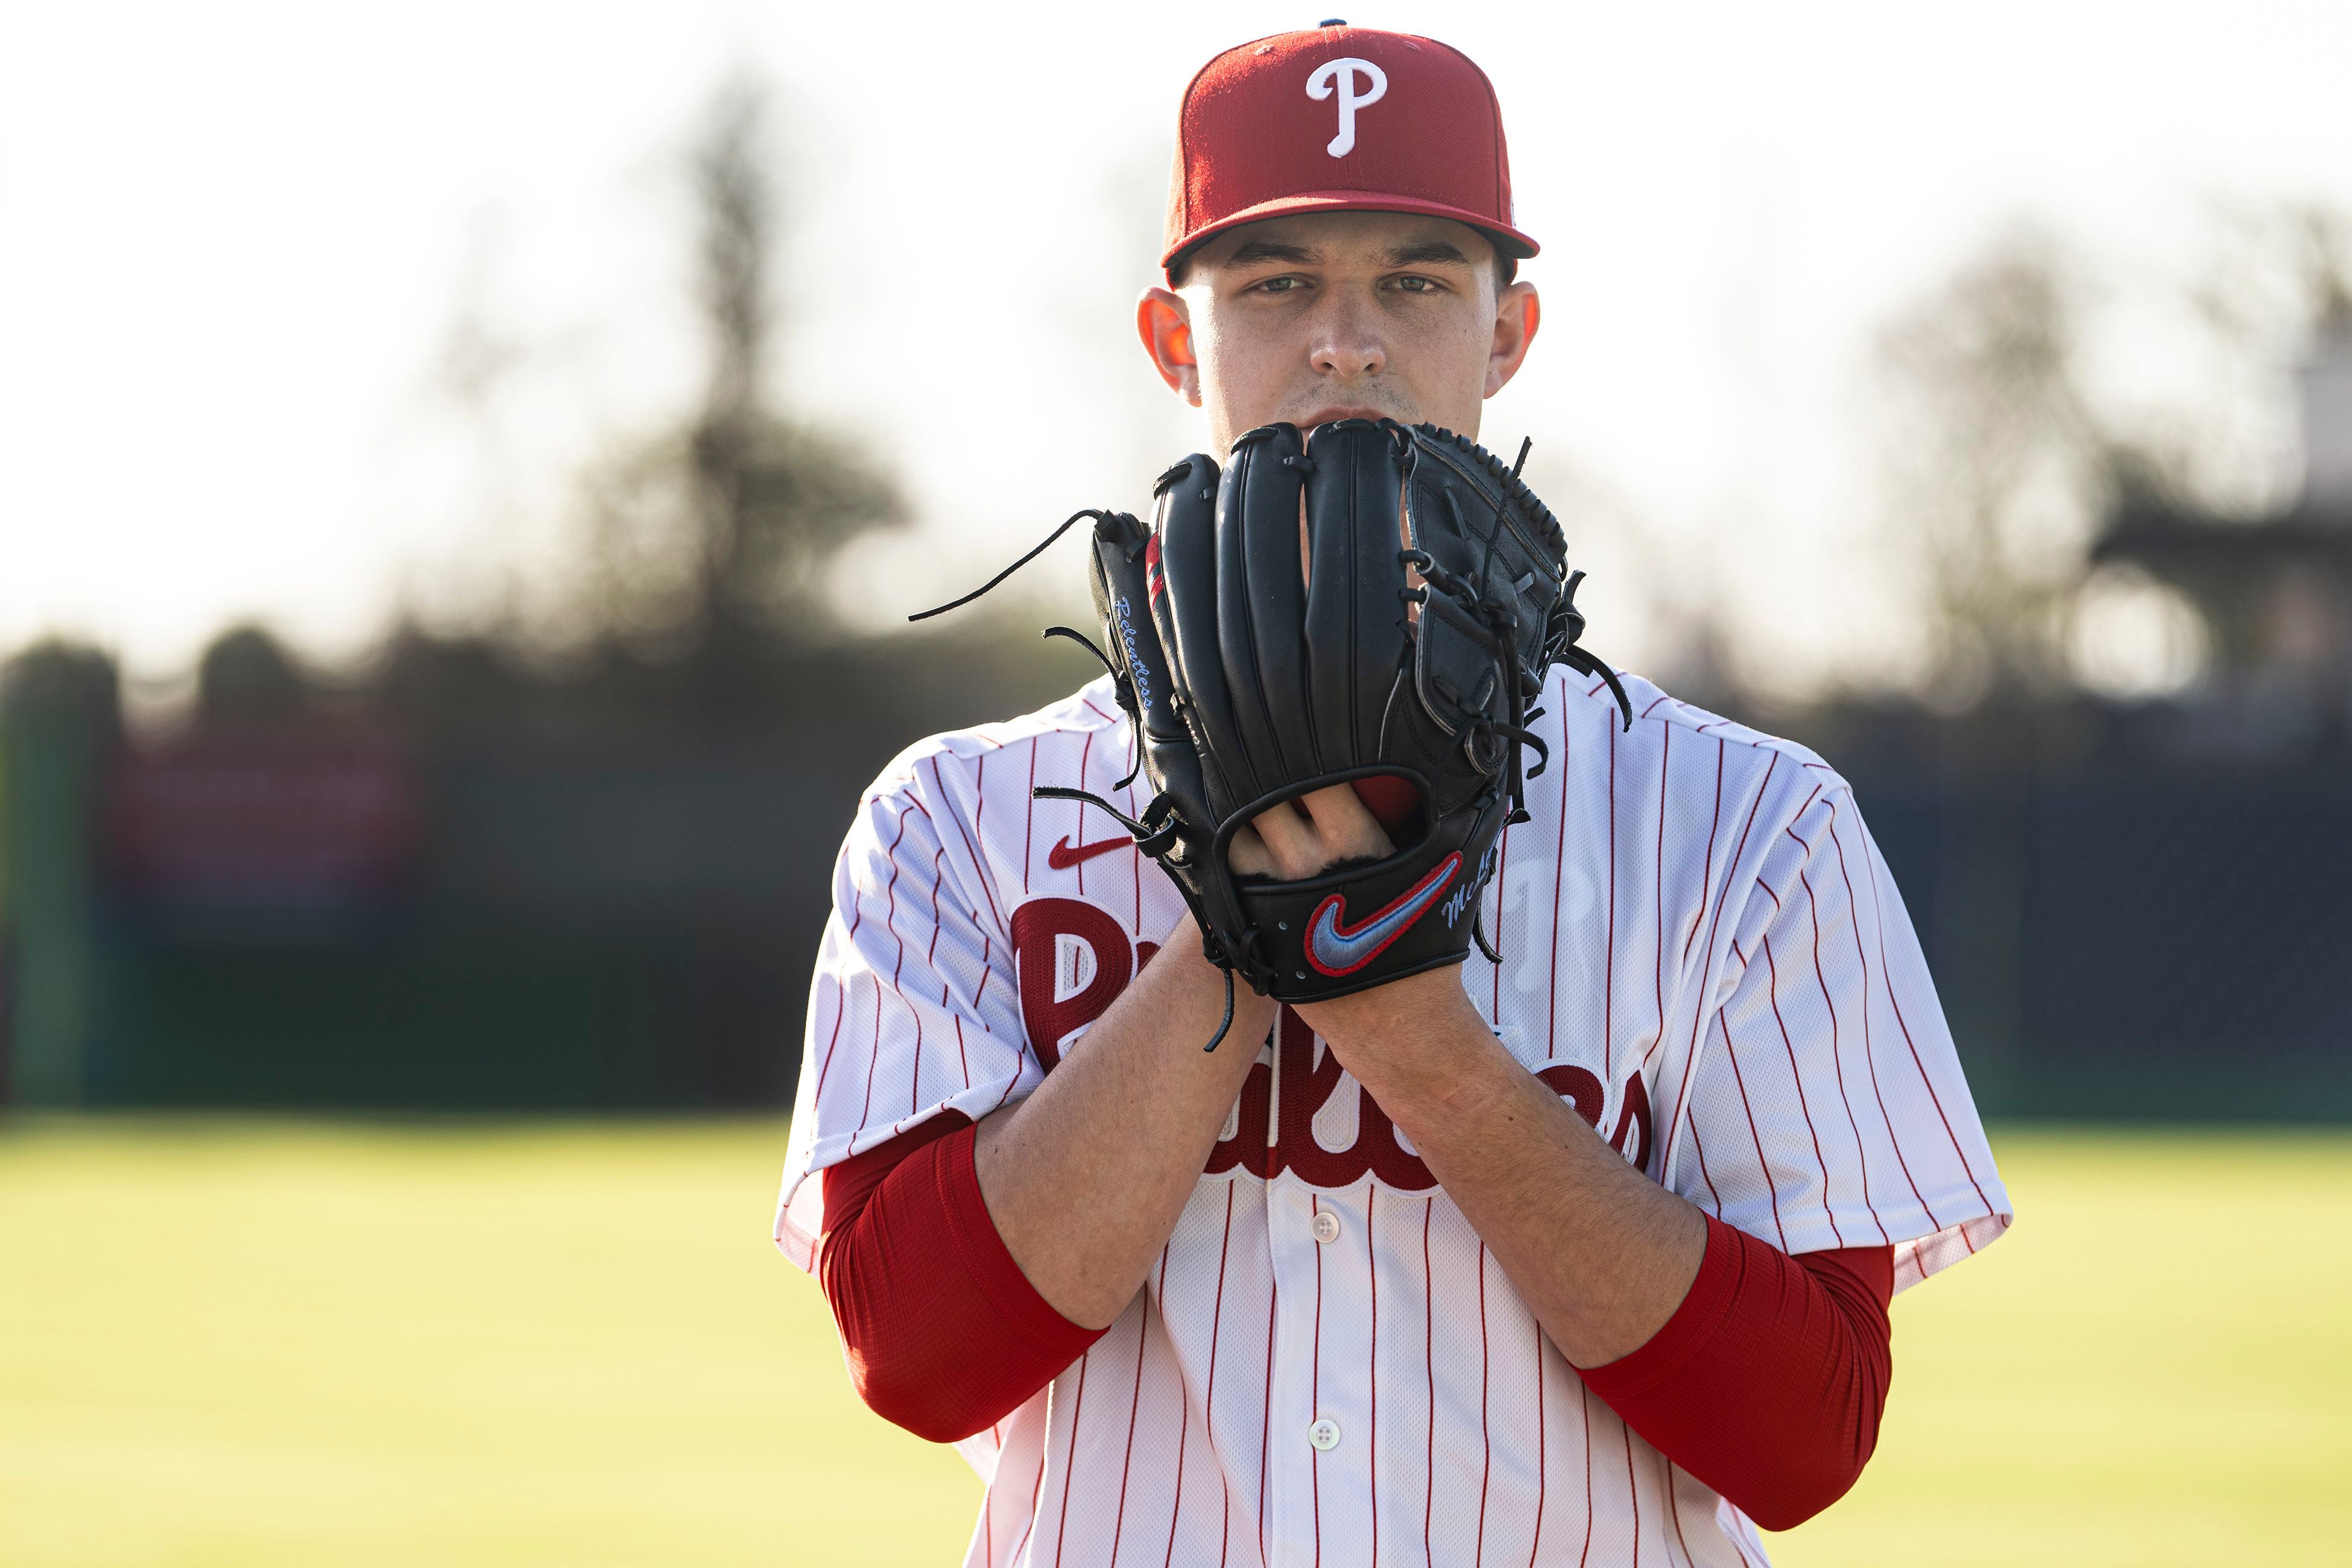 Phillies prospect Mick Abel dominates on the mound, while Justin